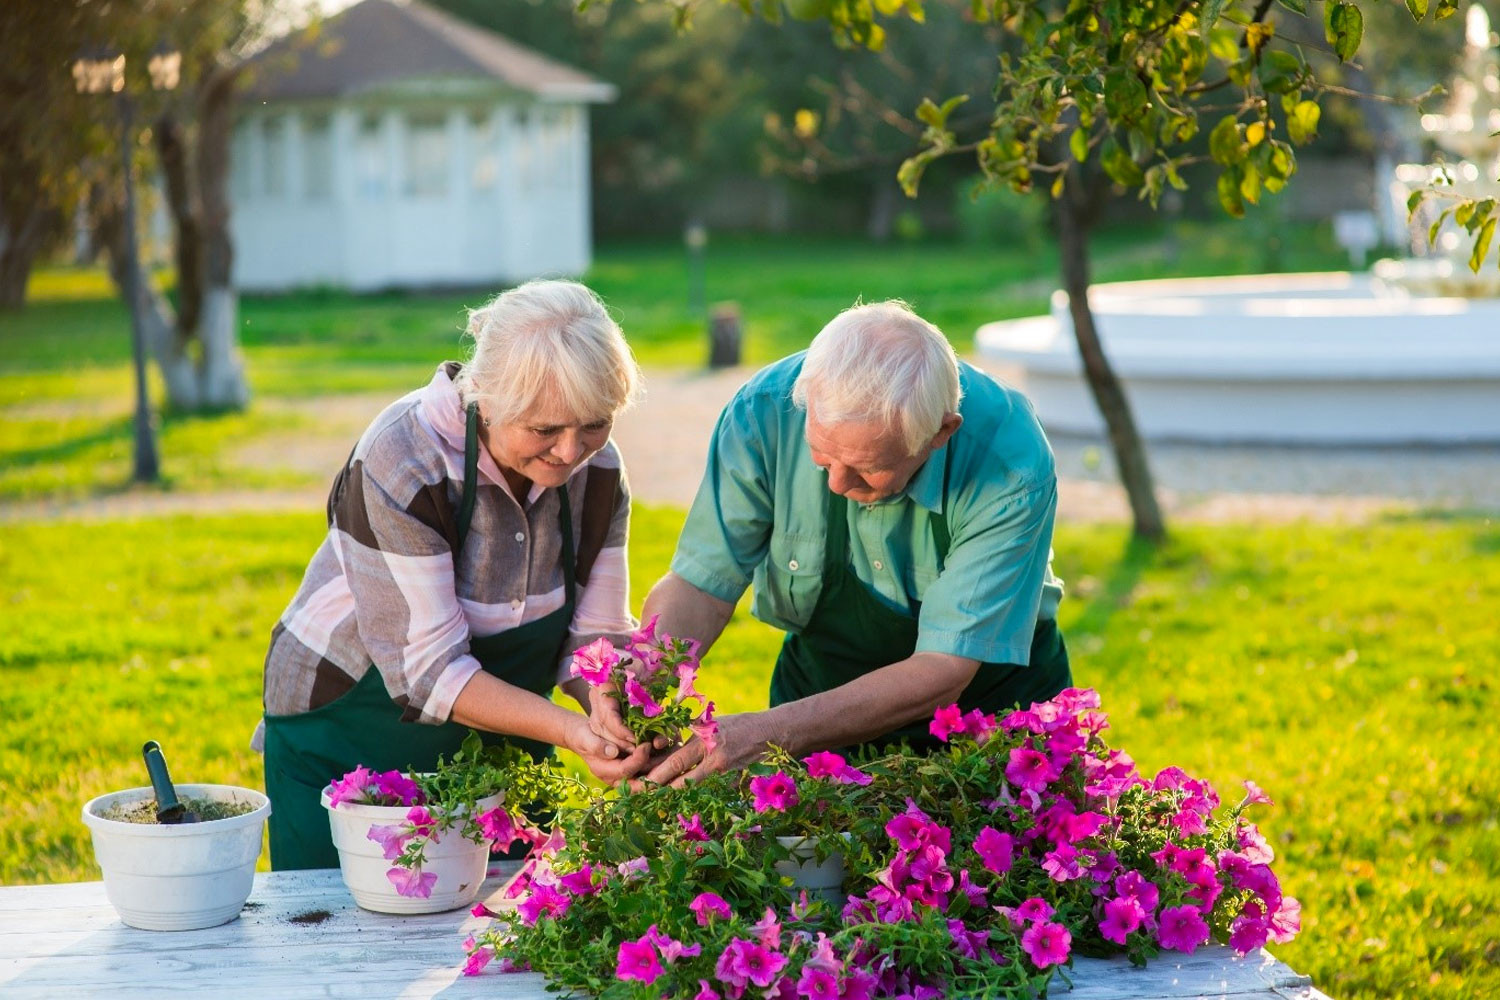 Home Activities For Adults
 Home Health Care Agency Serving New York